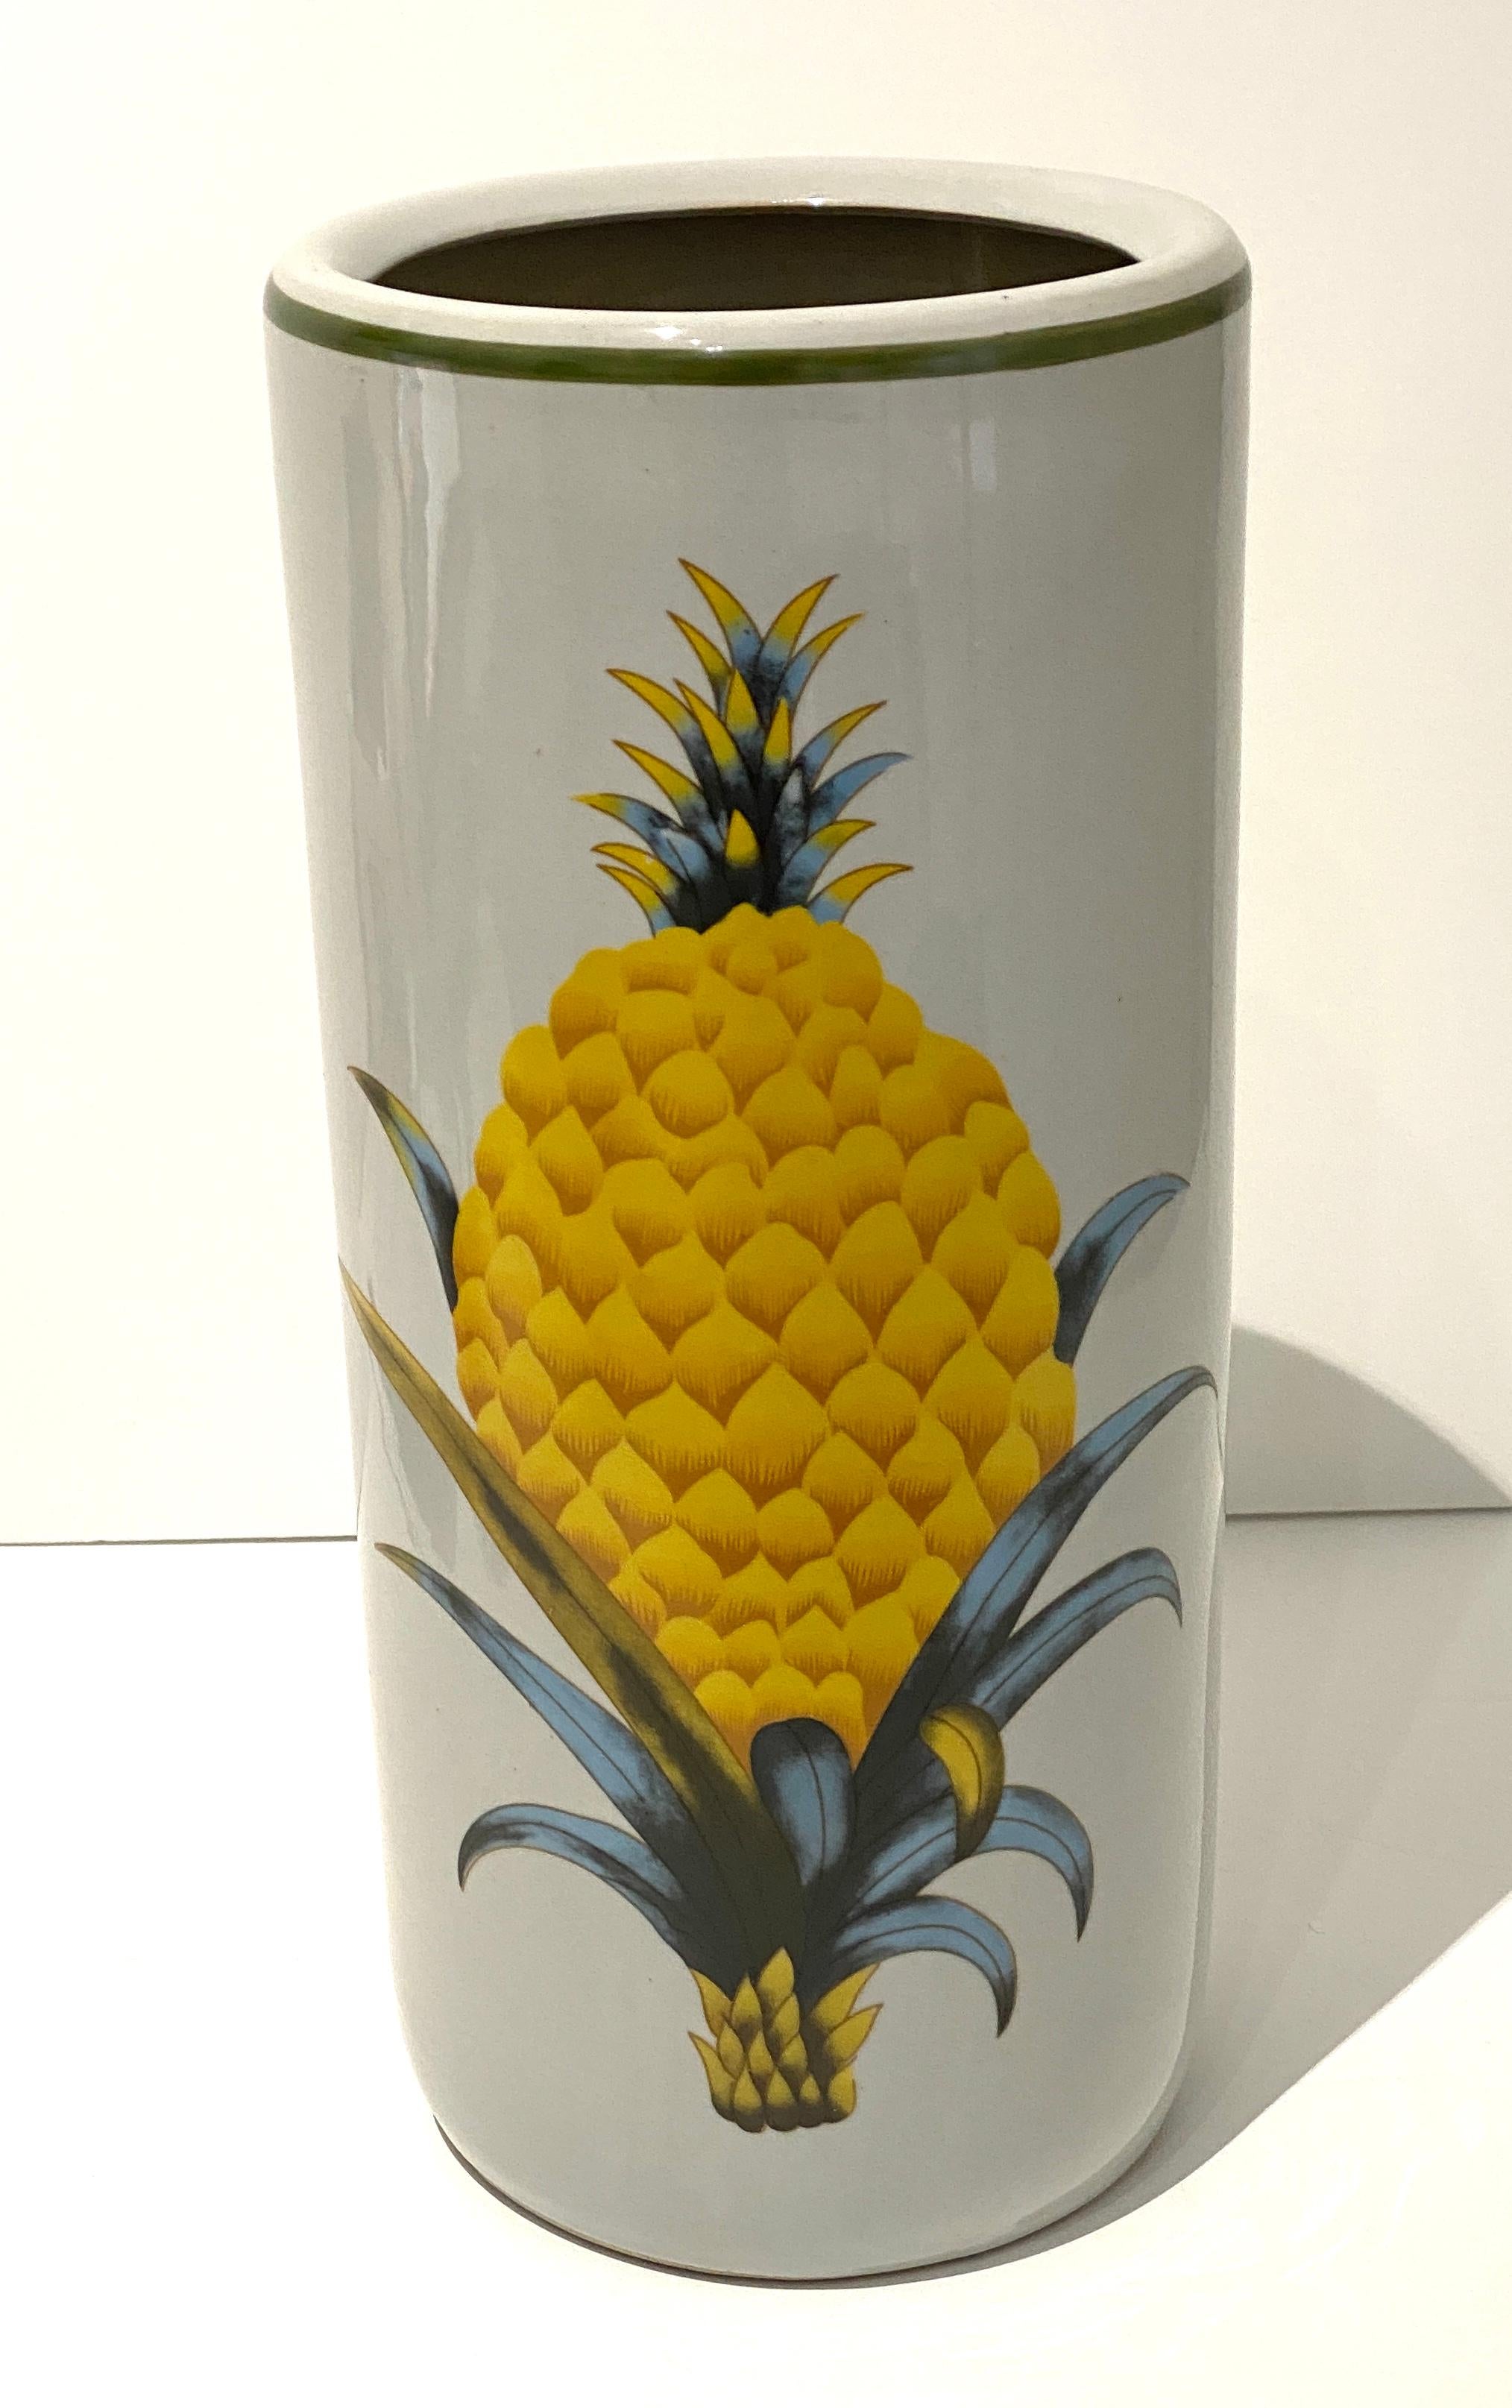 This stylish umbrella urn with its pineapple medallion's will make a statment of welcome to your homes entry, or perhaps mudroom. 

Note: The pineapple medallion appears on two sides of the urn.